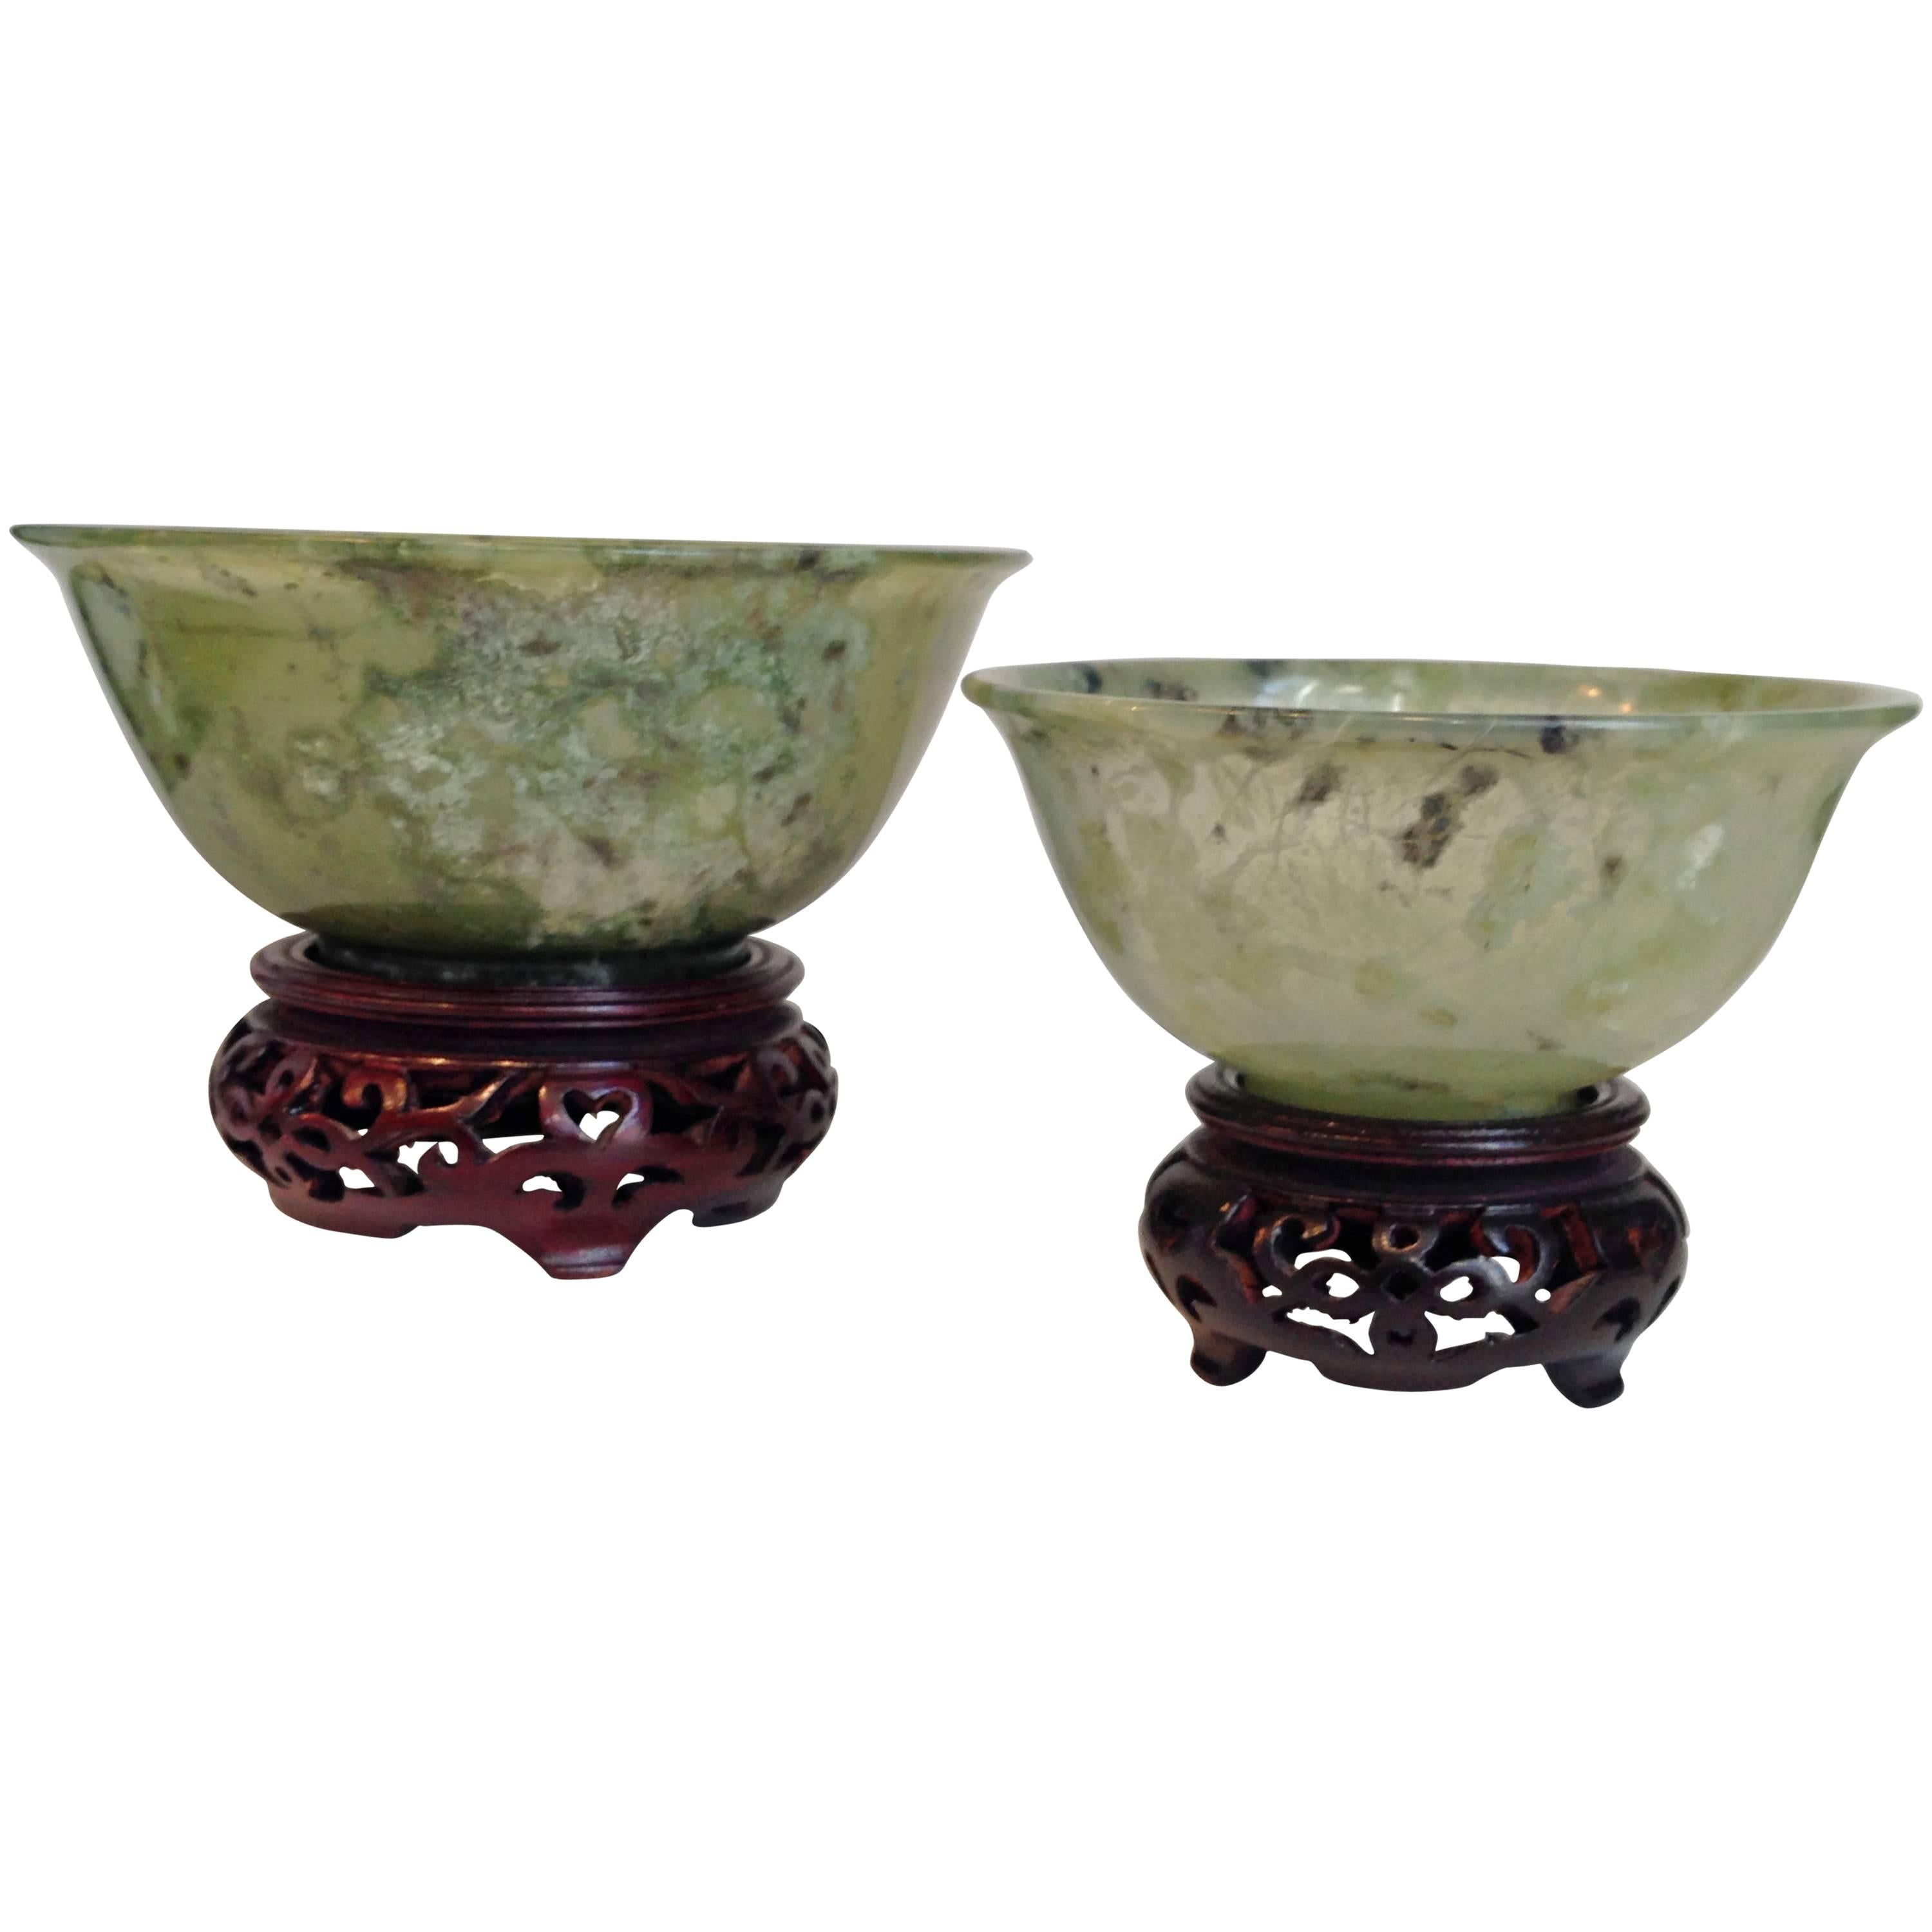 20th Century Chinese Pair of Jade Bowls on Stands